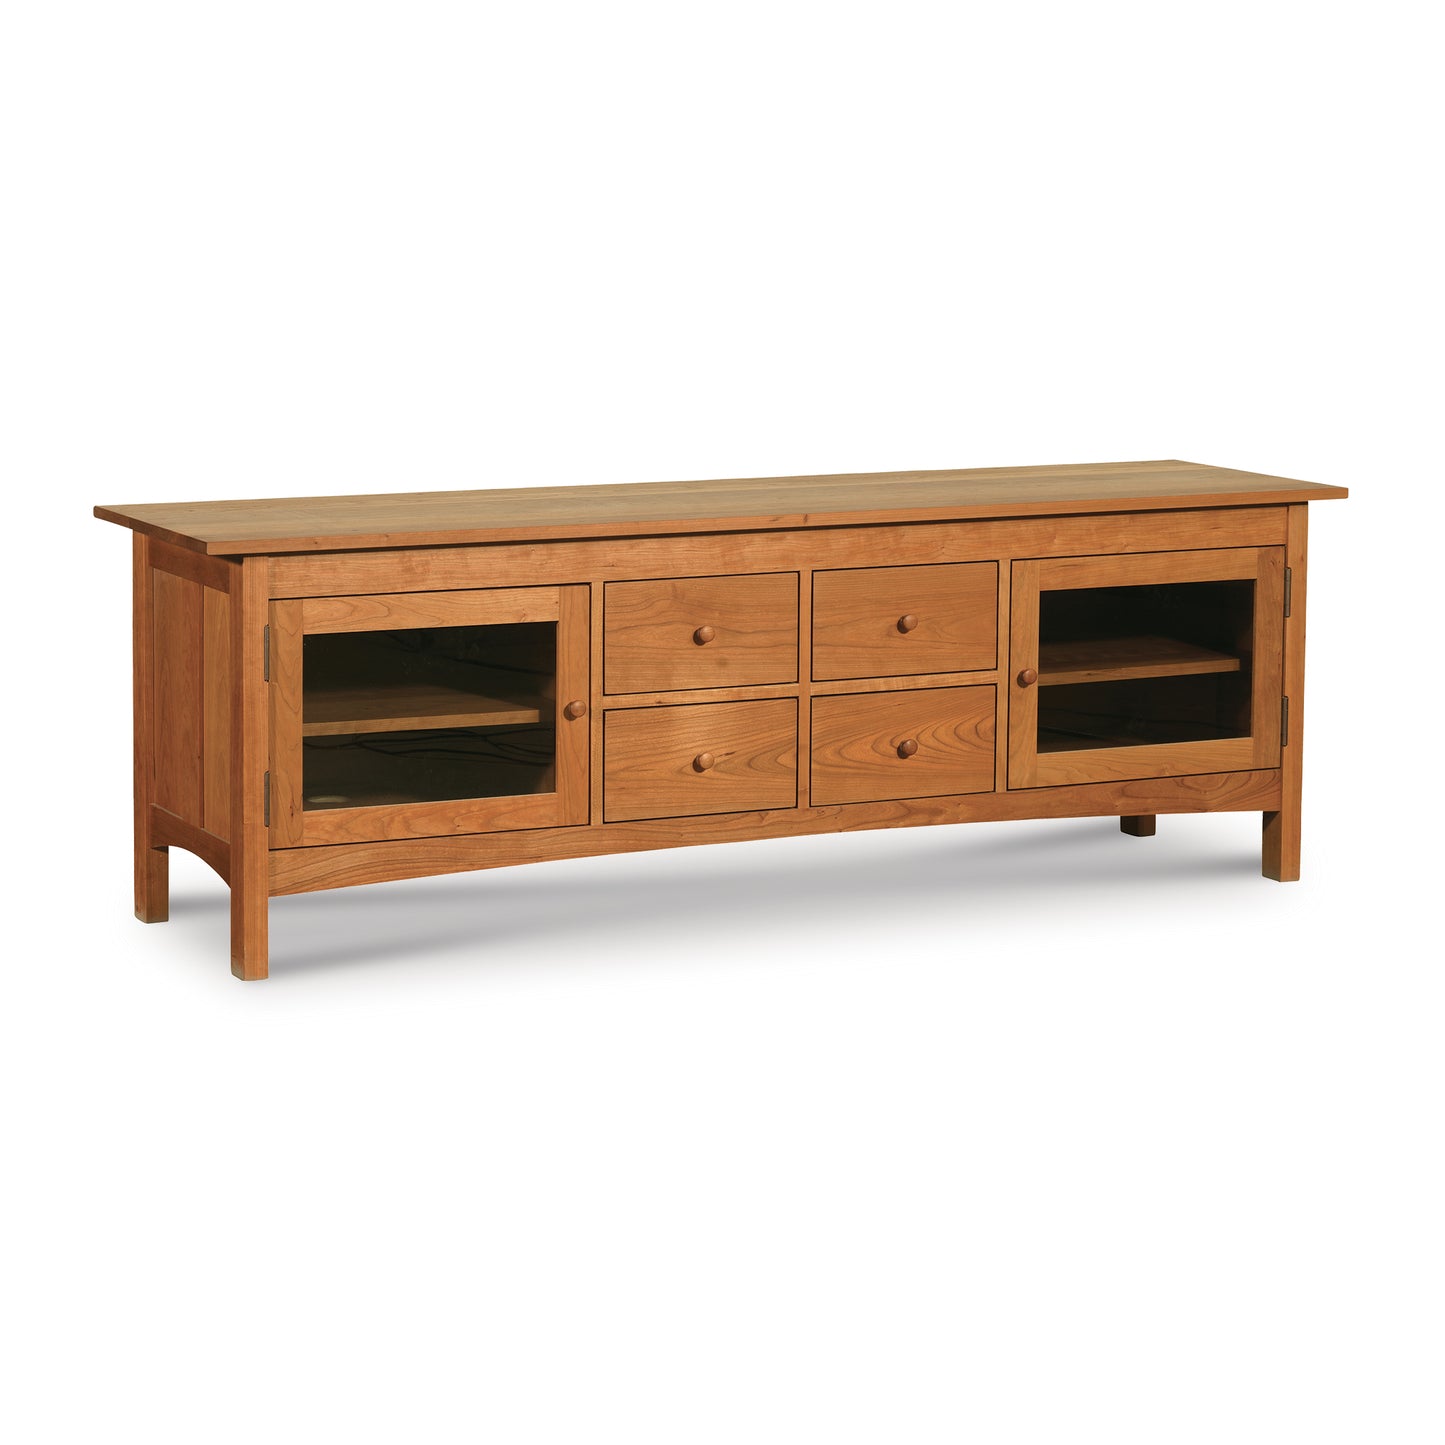 A handcrafted, solid wood Burlington Shaker 4-Drawer Media Console with multiple drawers and open shelves, isolated on a white background by Vermont Furniture Designs.